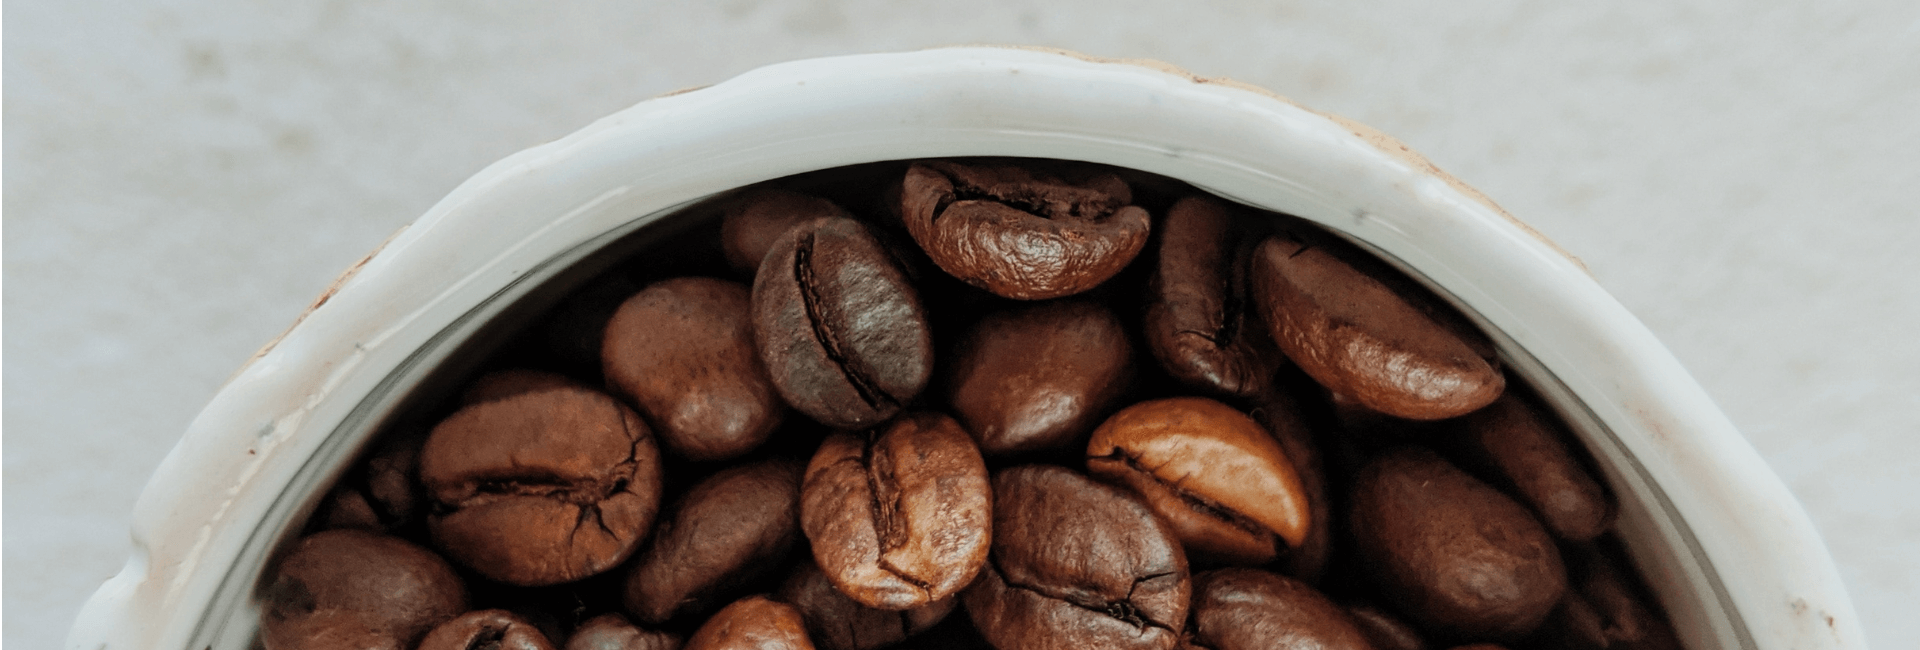 dark roasted coffee beans in a white bowl ready to be ground